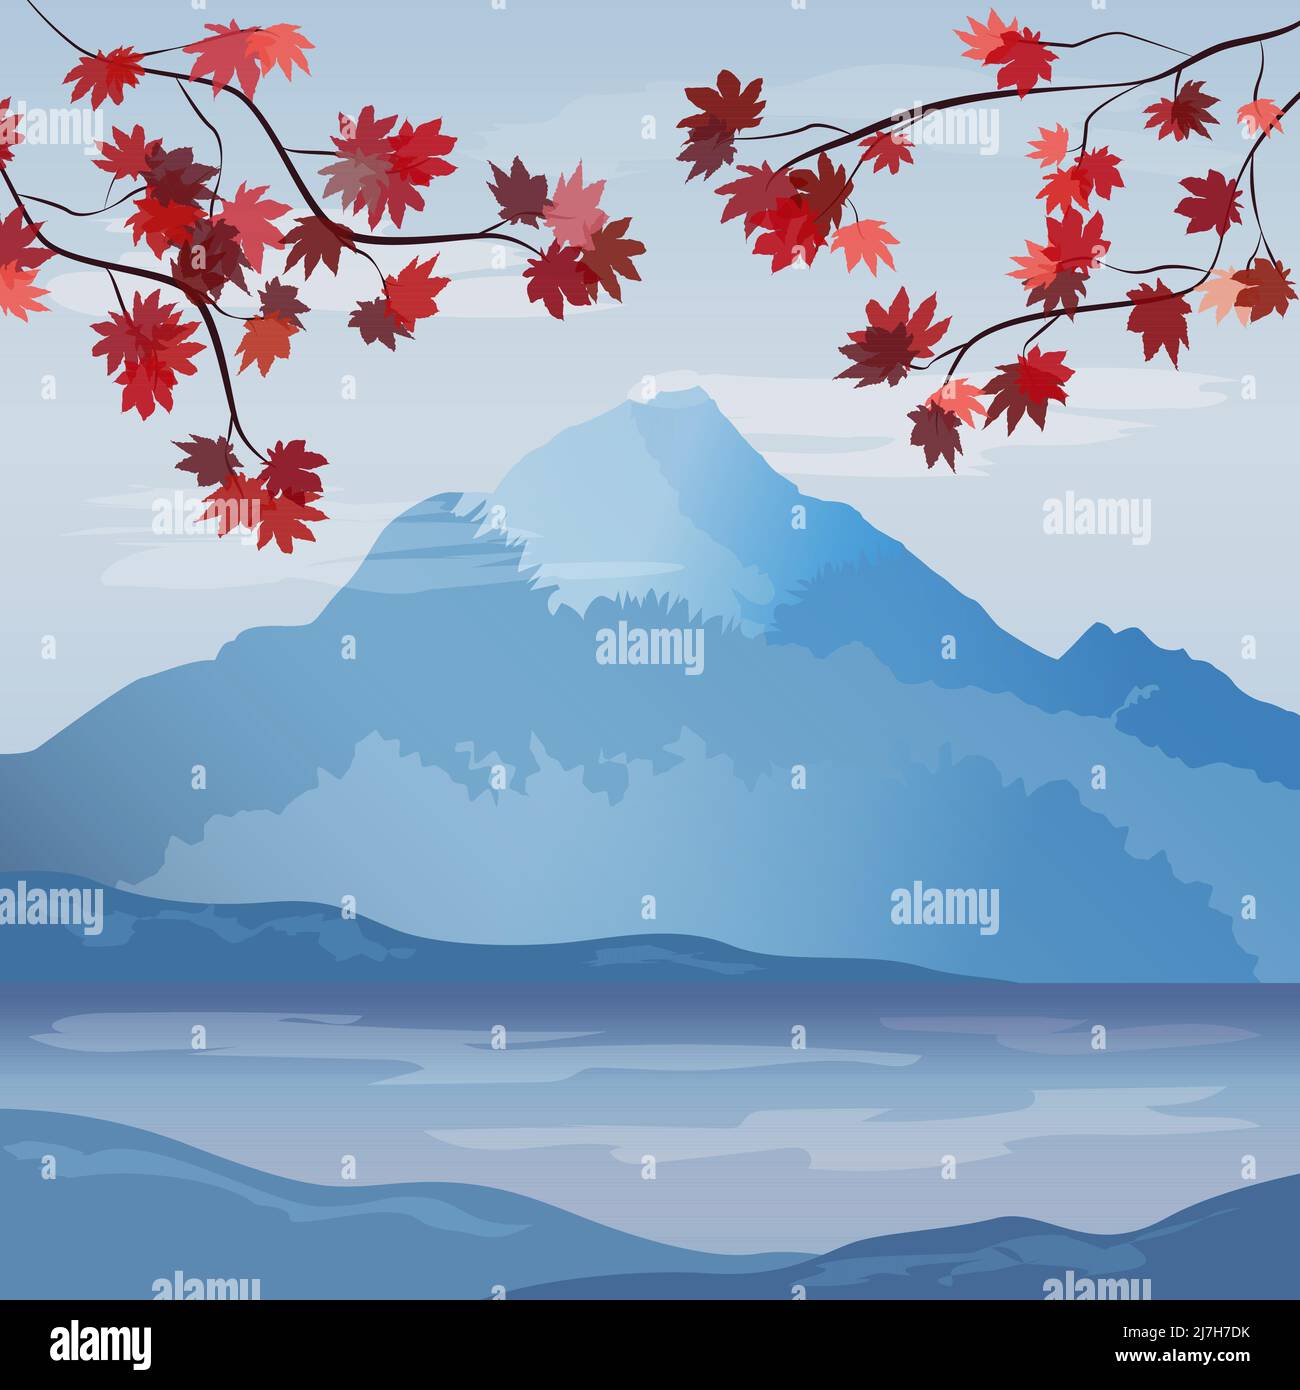 Landscape with Fujiyama and red maples. Japan.  Stock Vector